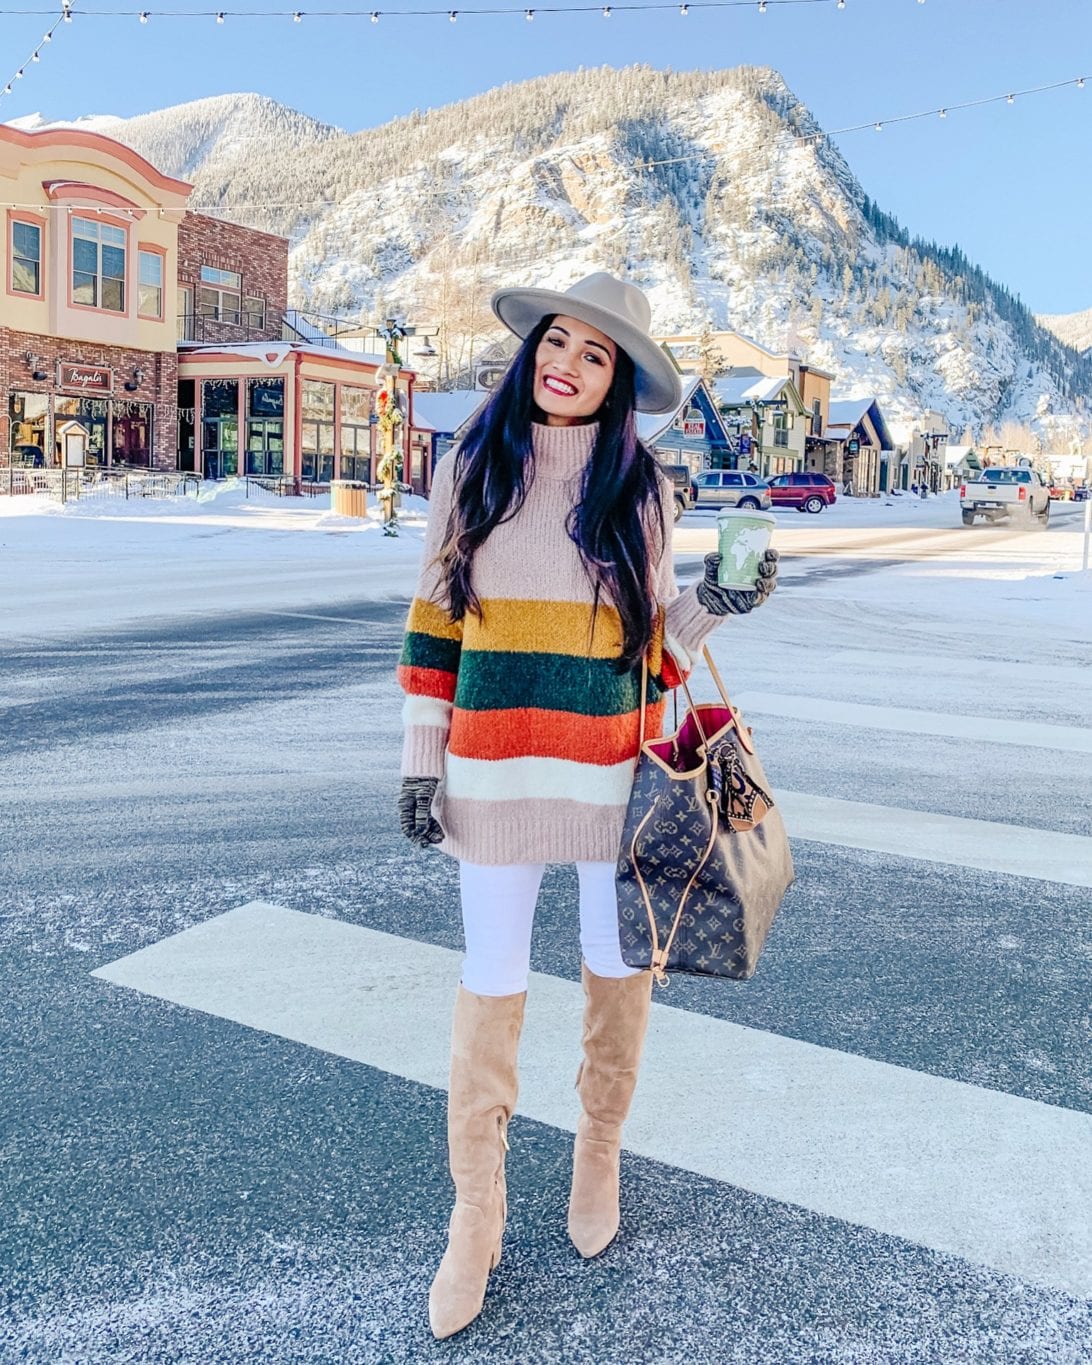 Colorado Instagram Roundup + 12 Winter Outfits To Copy This Season - Dawn  P. Darnell